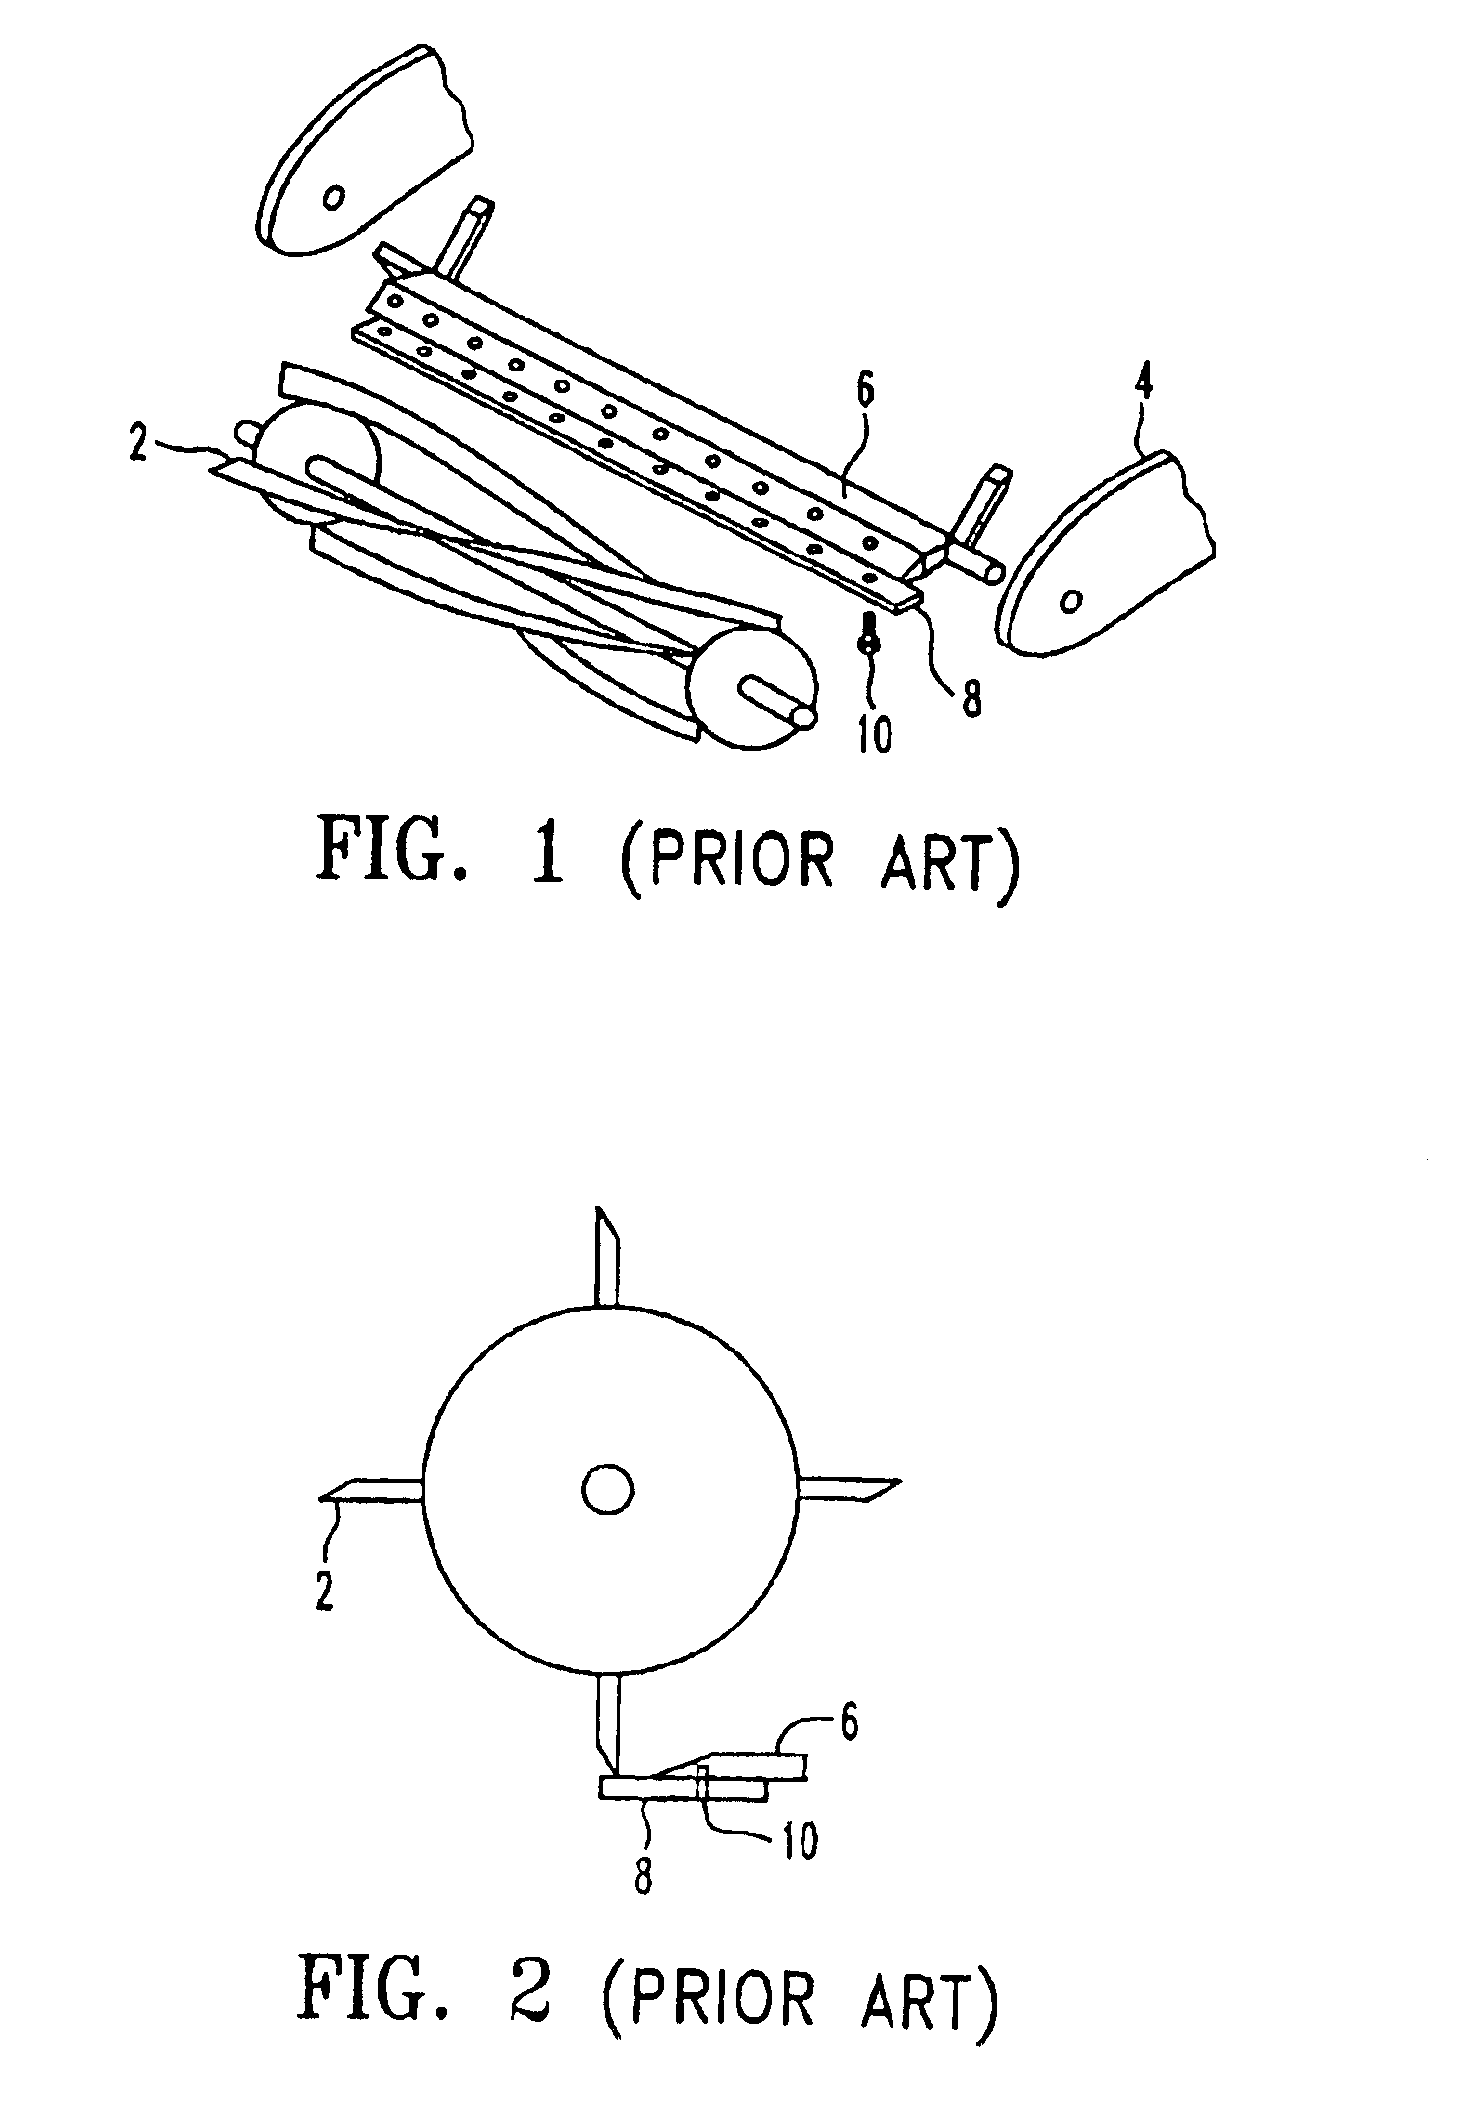 Magnetic attachment of a bed knife in a reel mower assembly